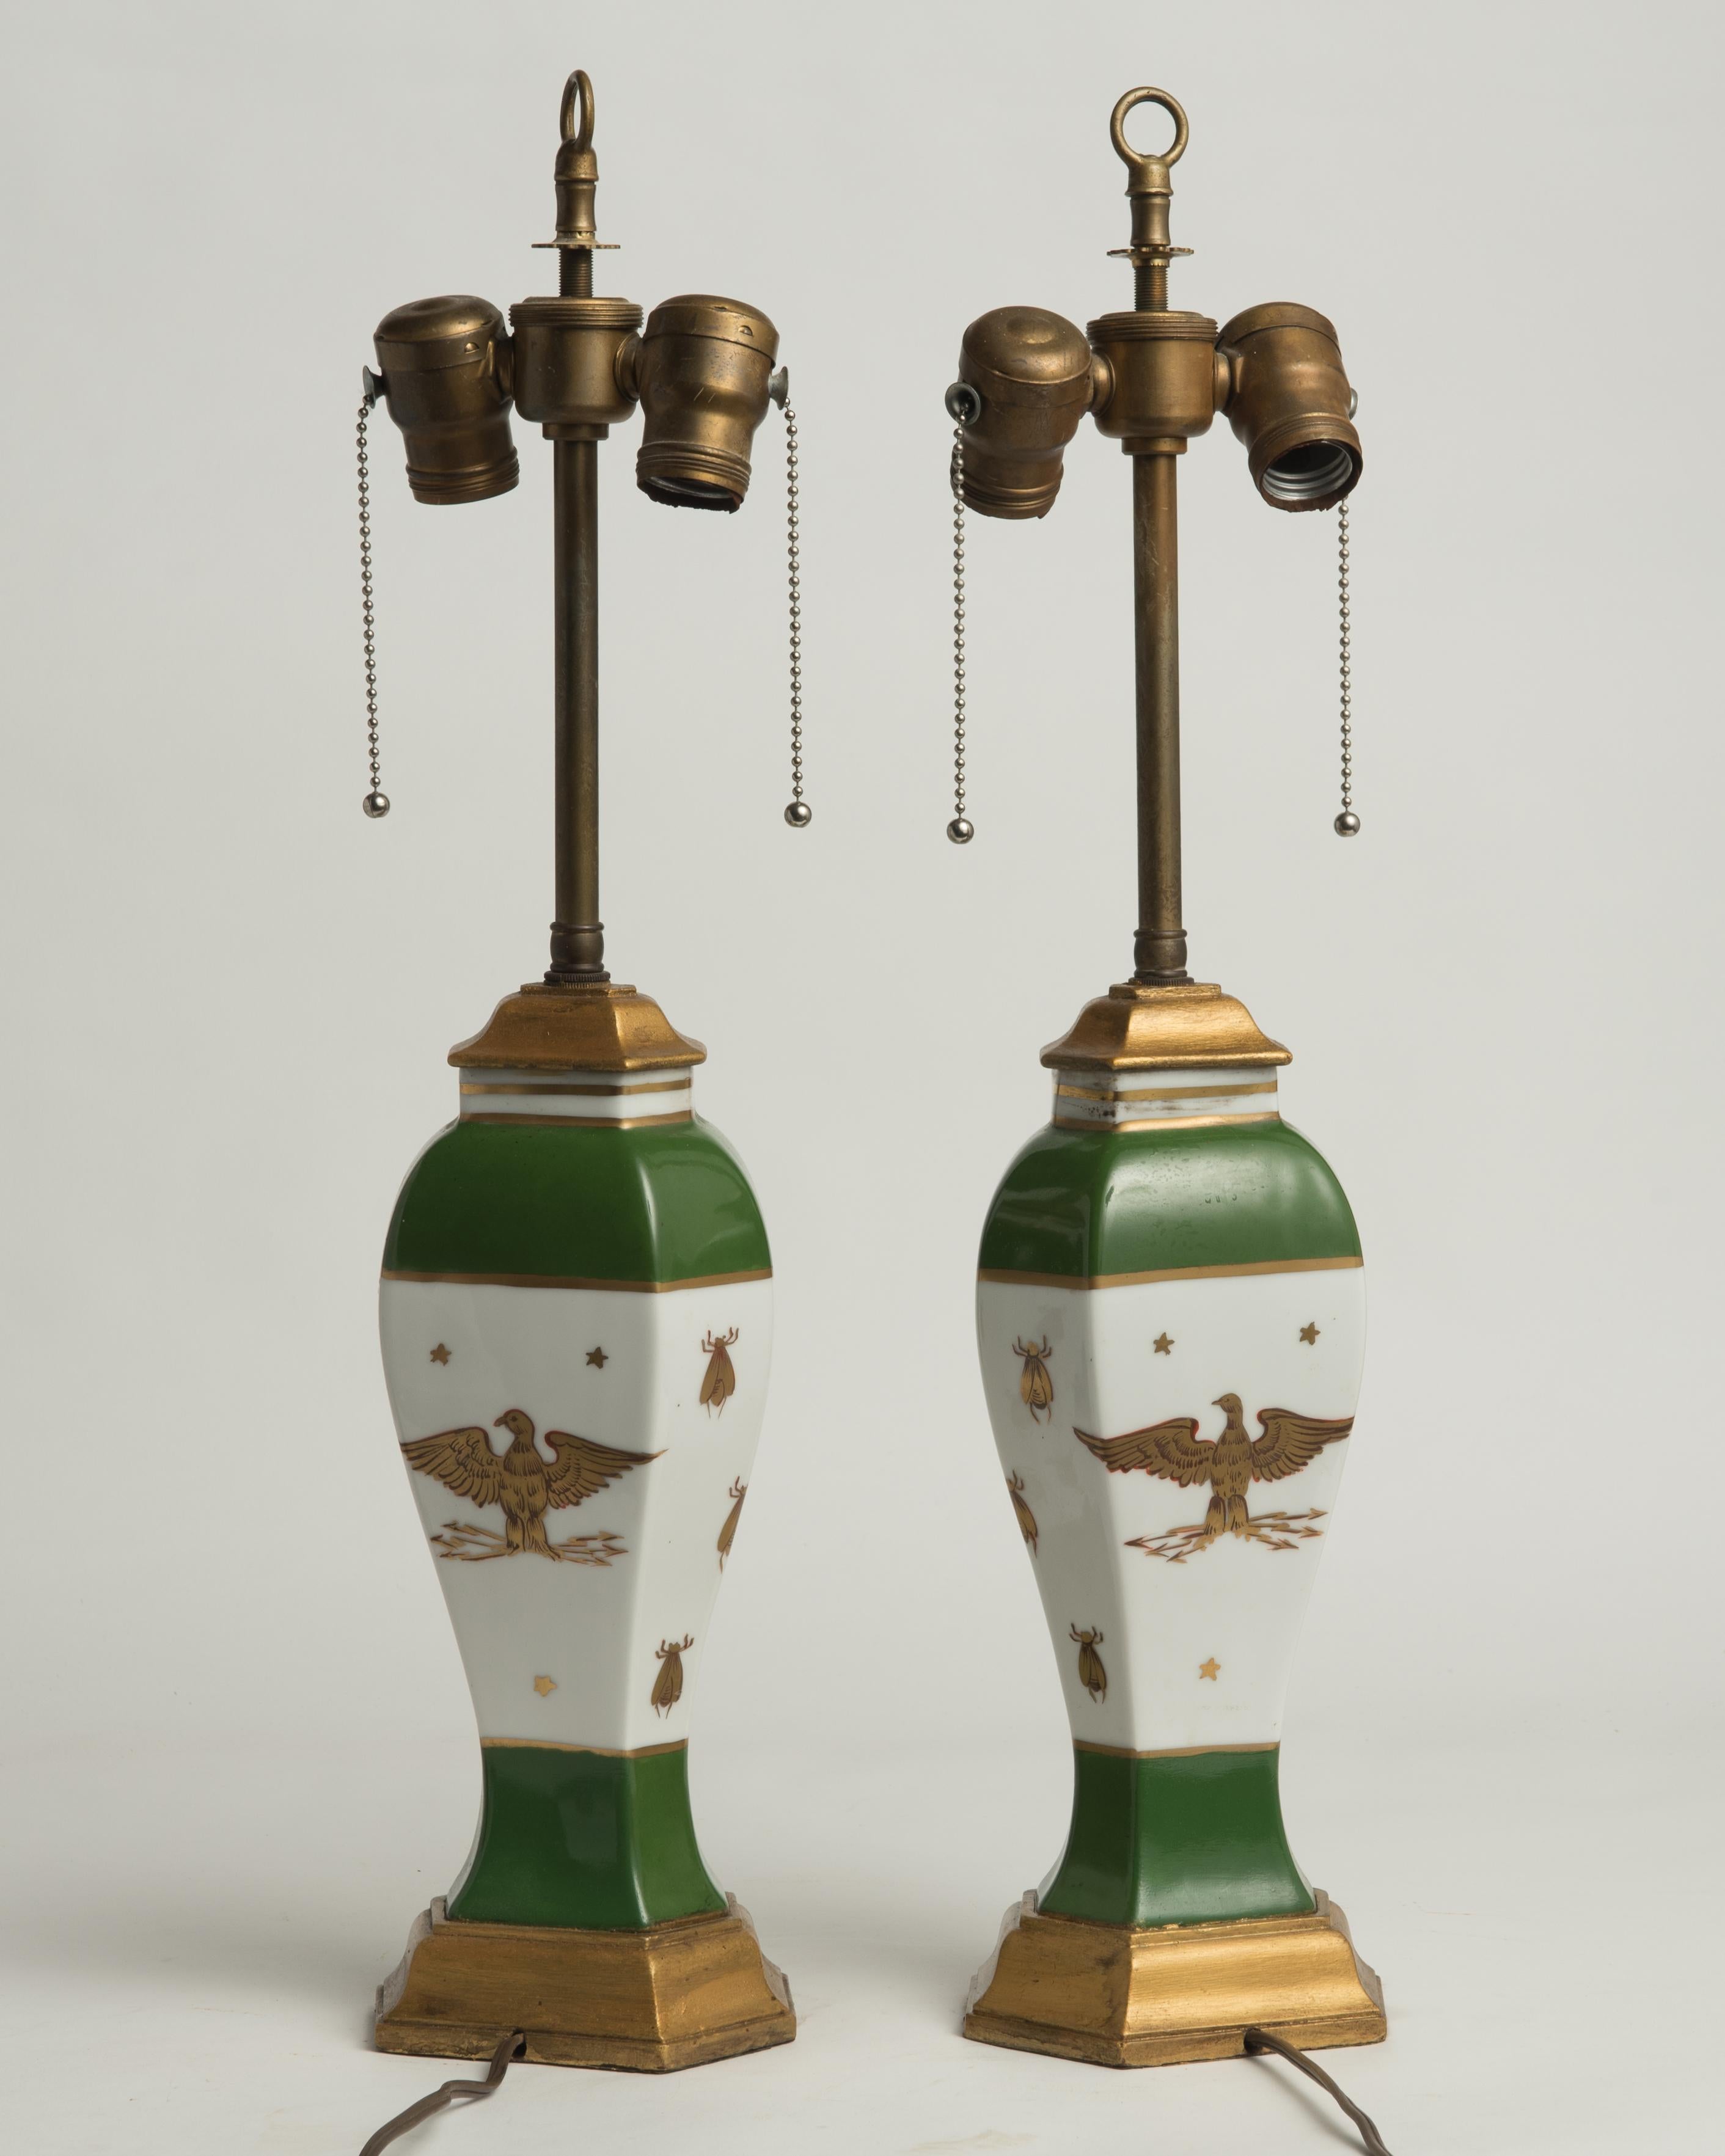 Hand-Painted Late 19th Century French Napoleonic Lamps Style of Sèvres, a Pair